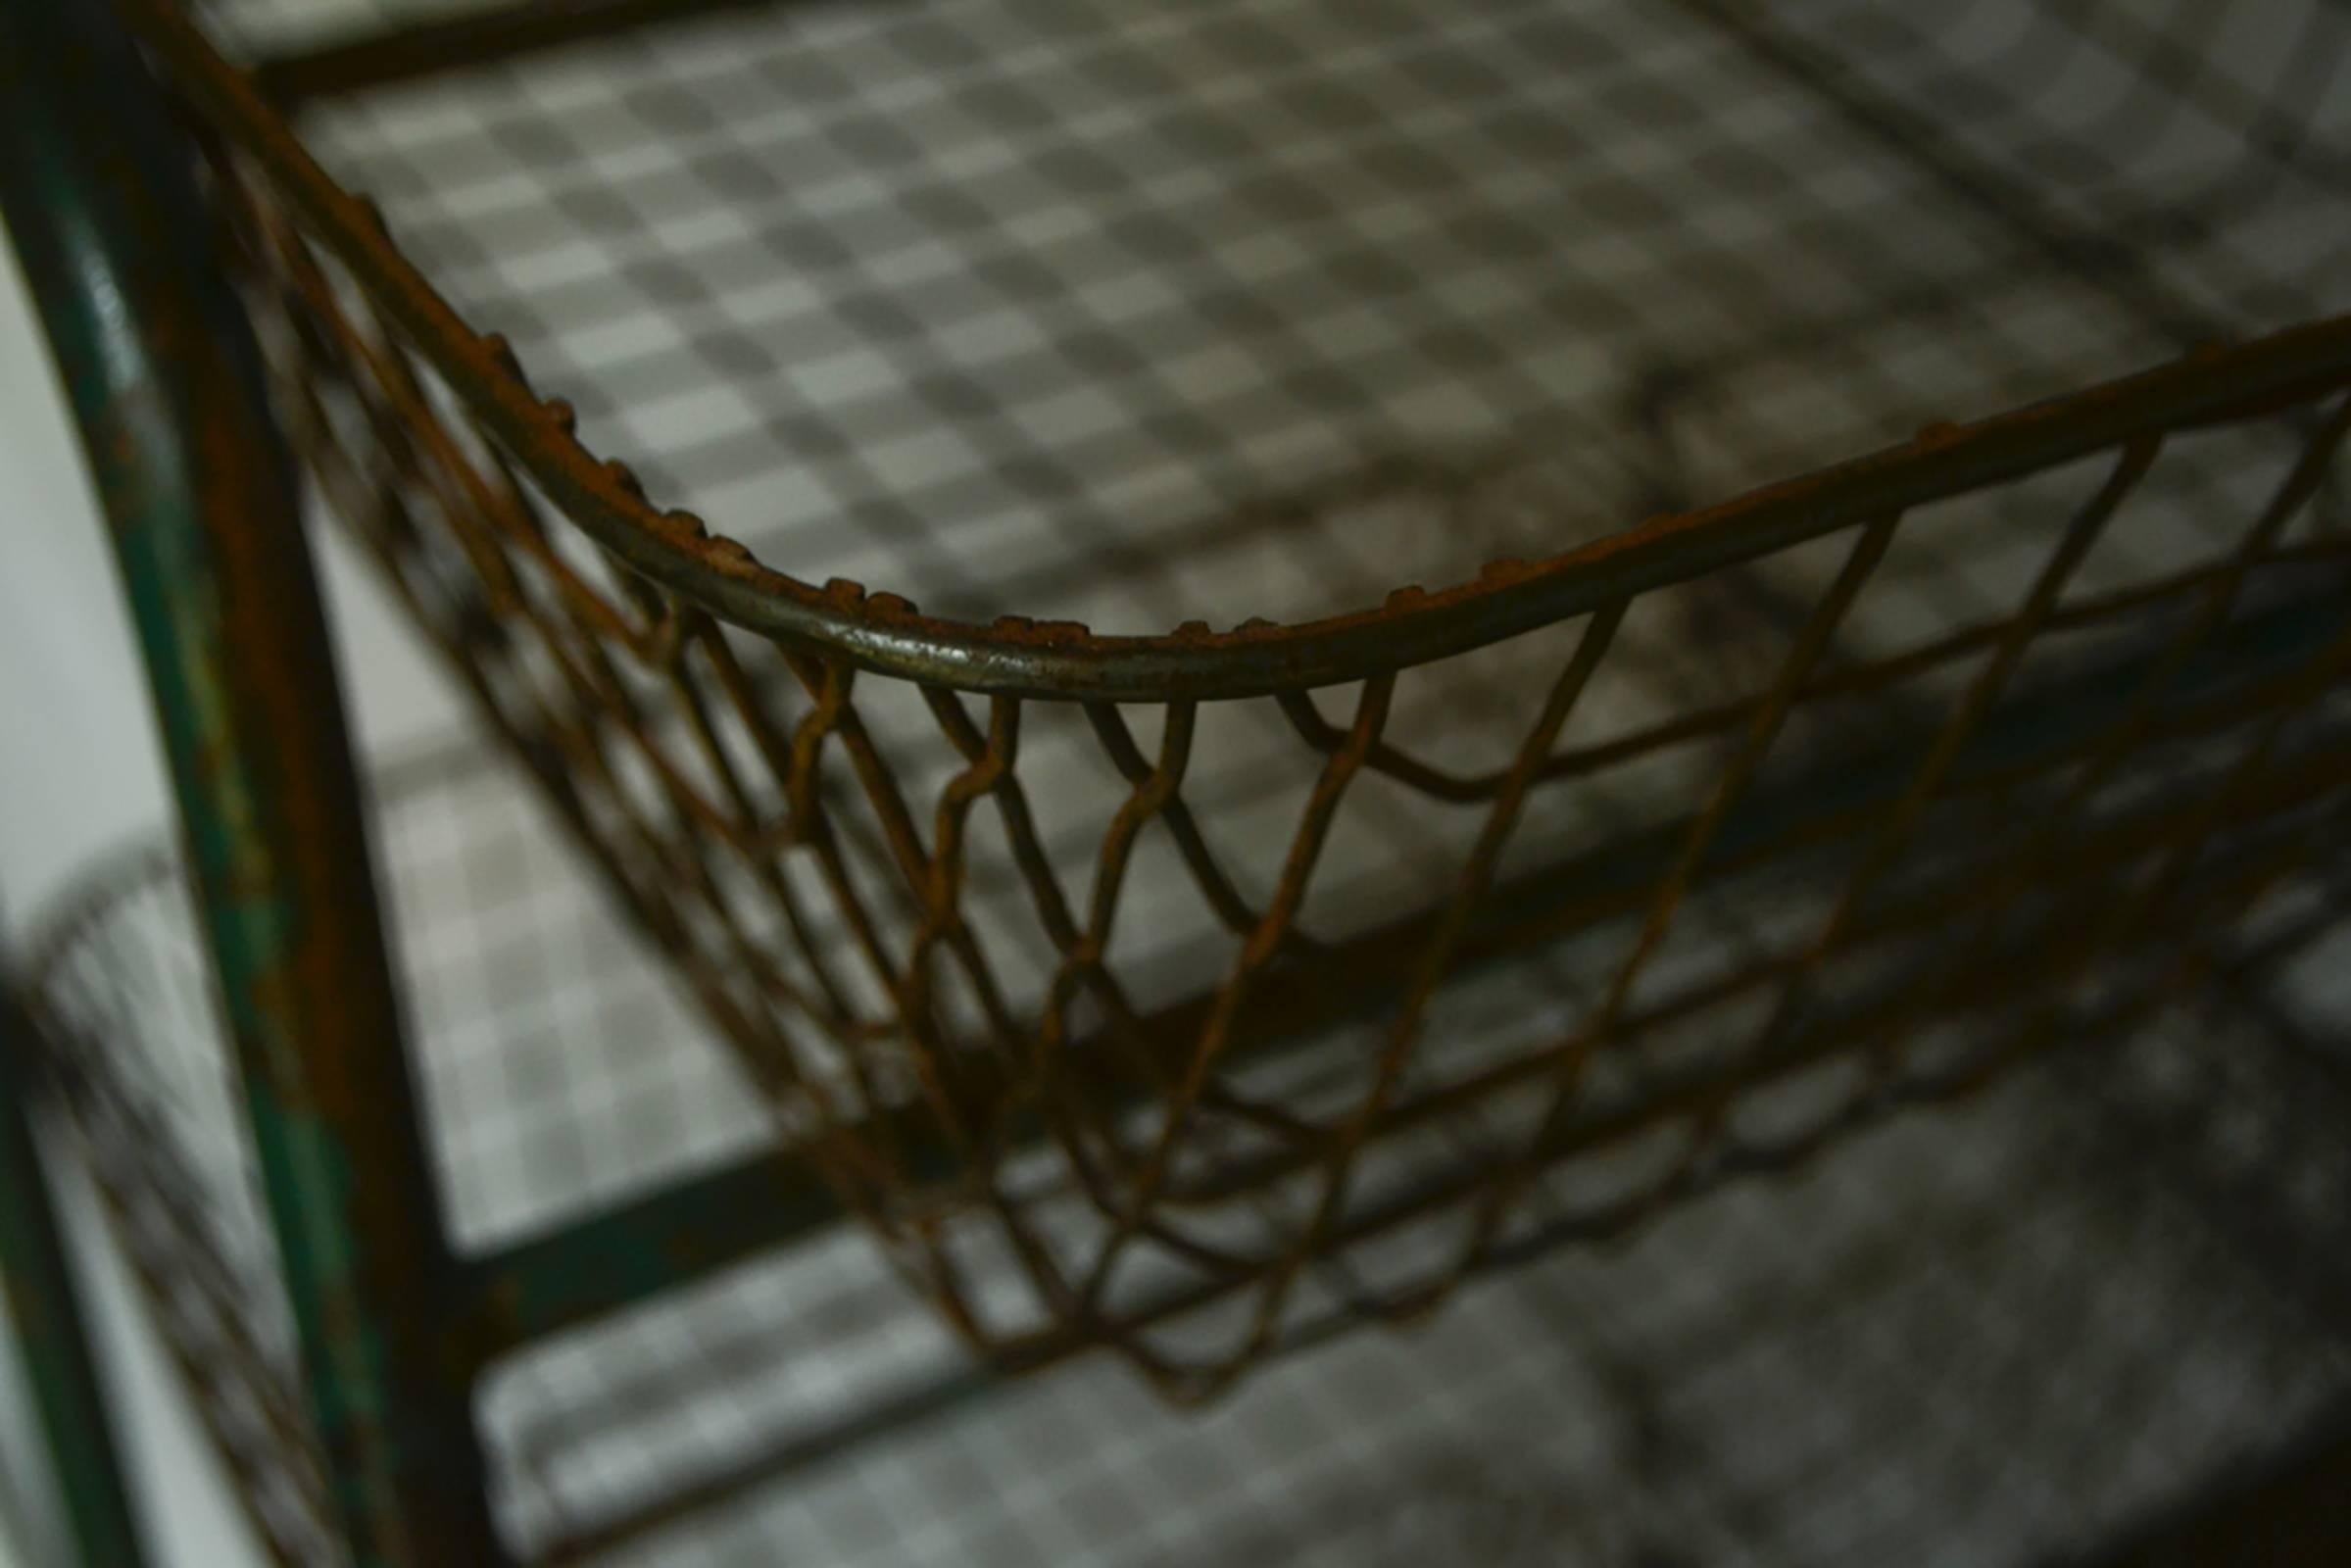 Vintage metal storage rack on casters. Painted green; please see images for detail of surface patina. 

Nine baskets for storage. Each 6 1/4 x 16 1/2 x 20 1/4 inches.